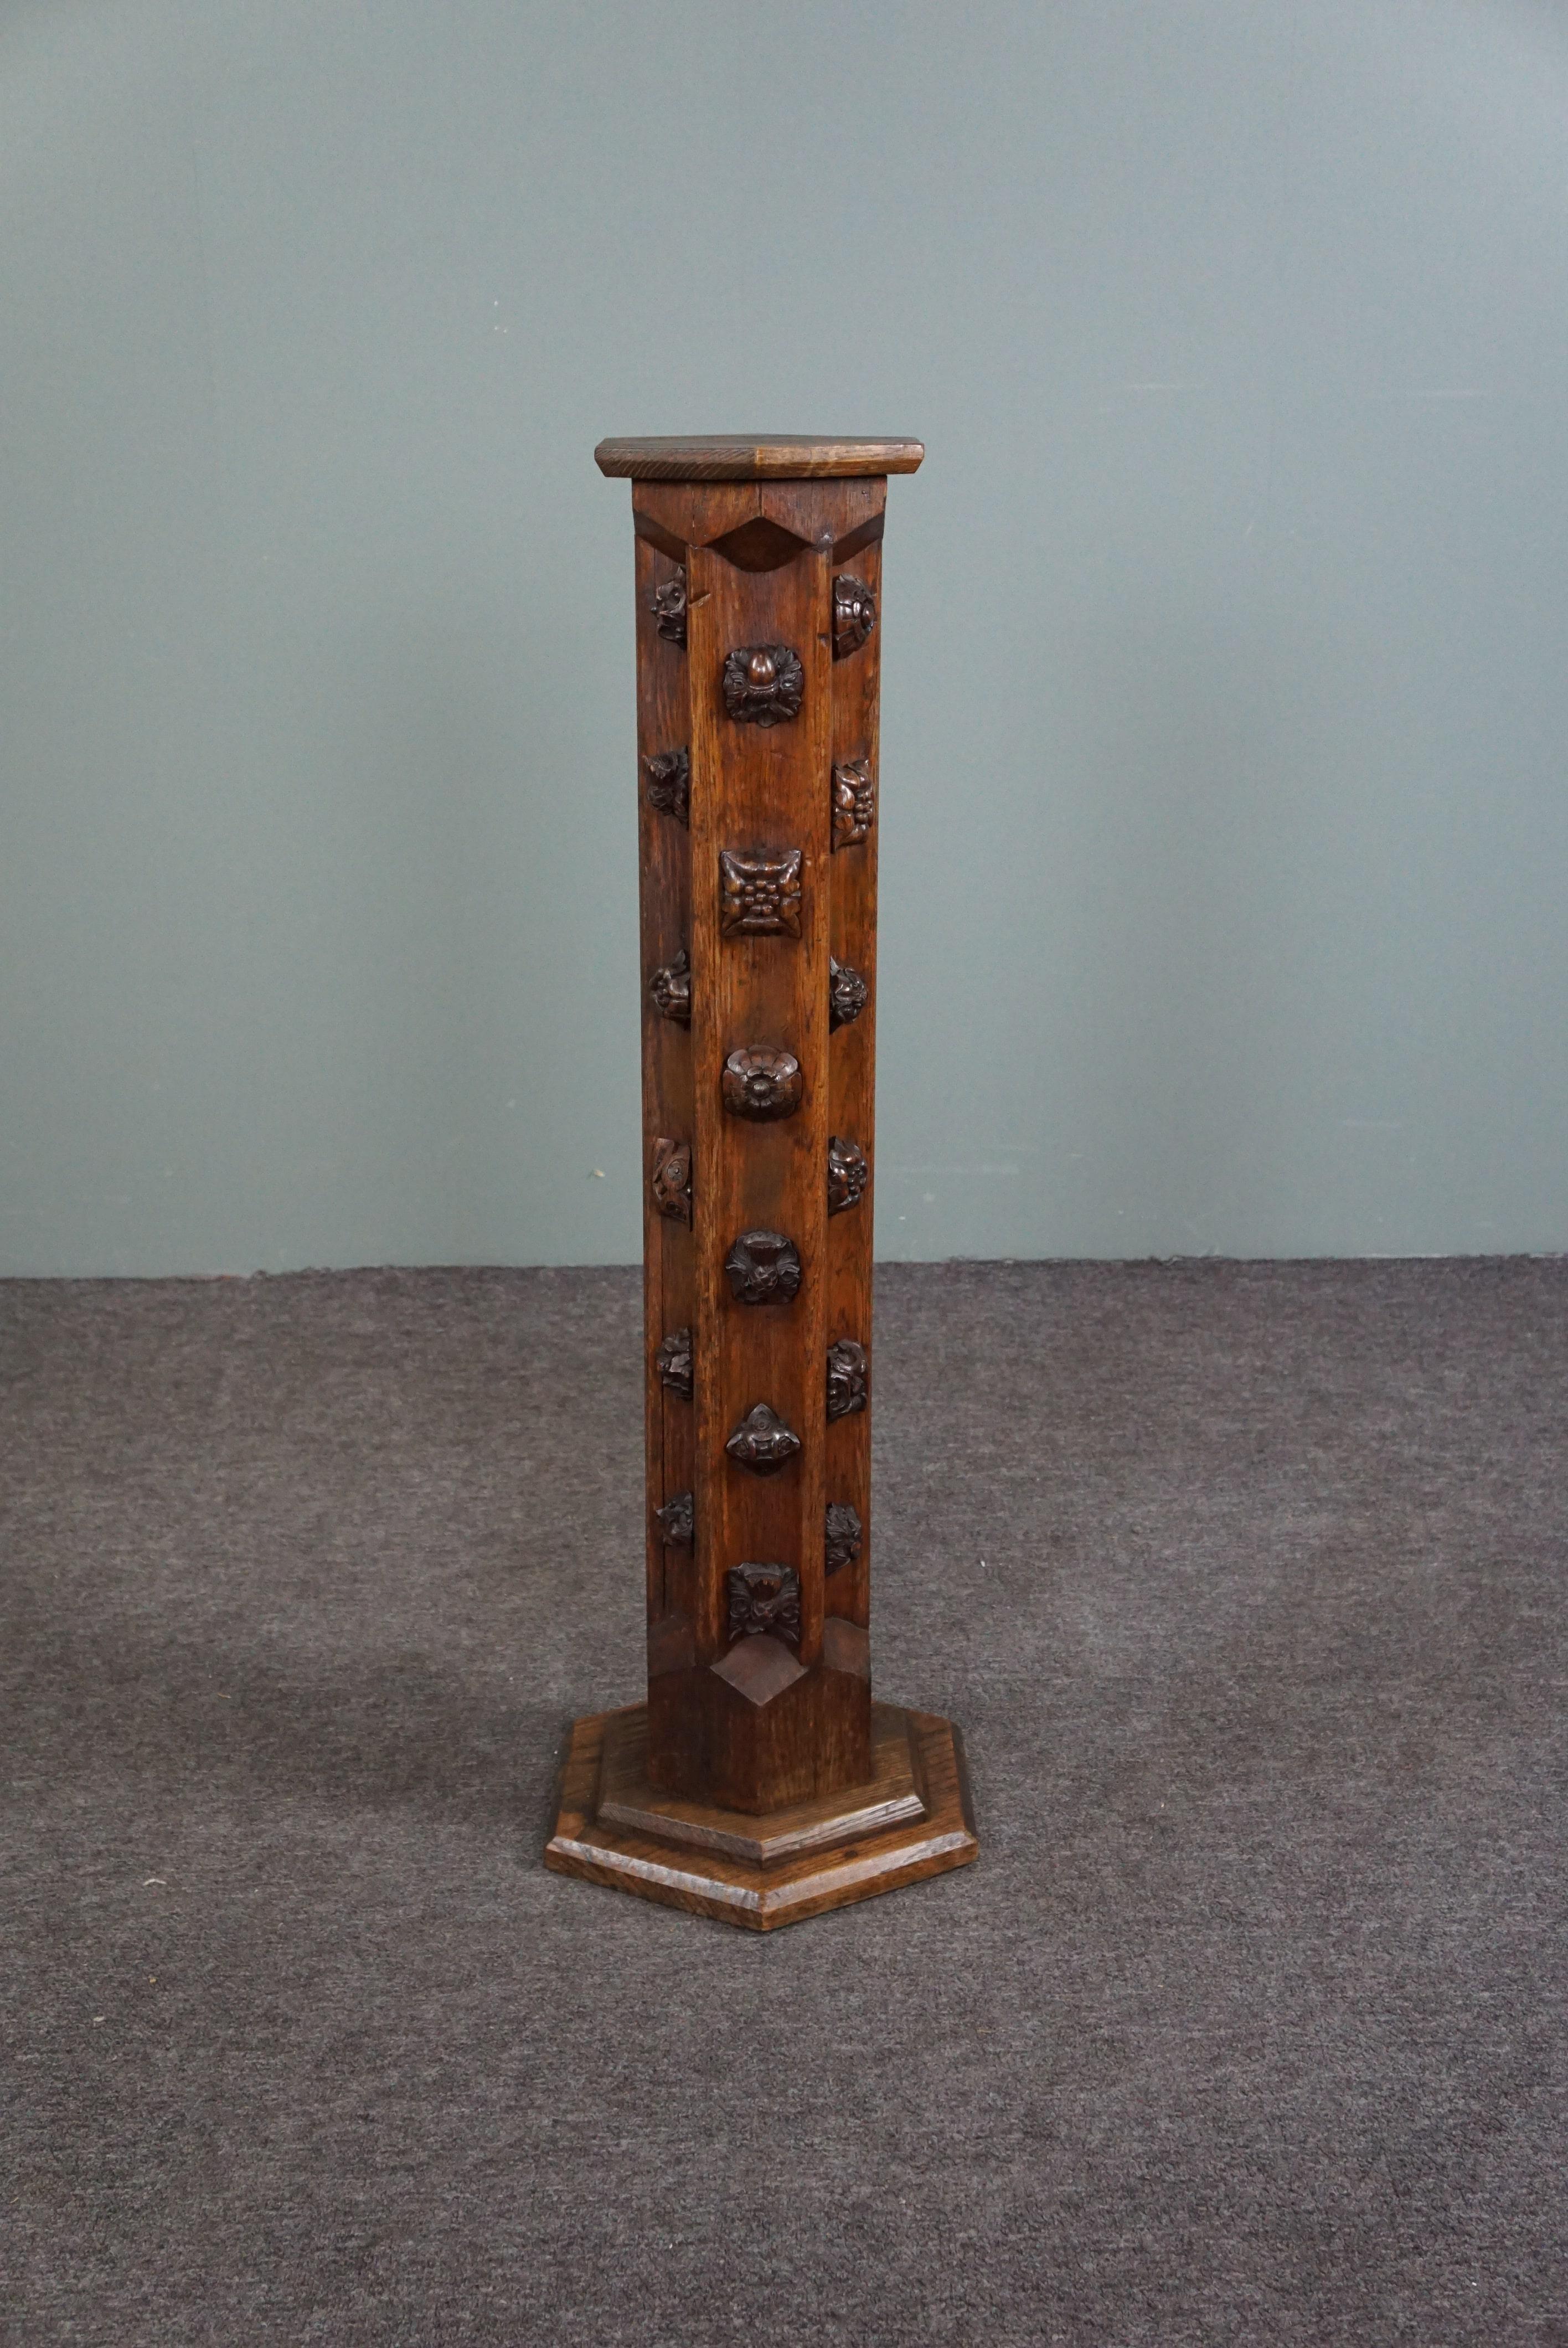 Offered is this very decoratively decorated wooden column from the end of the 19th century.

This pillar makes every object placed on it stand out and stand out. This very decorative whole can therefore be used for multiple purposes. This item can